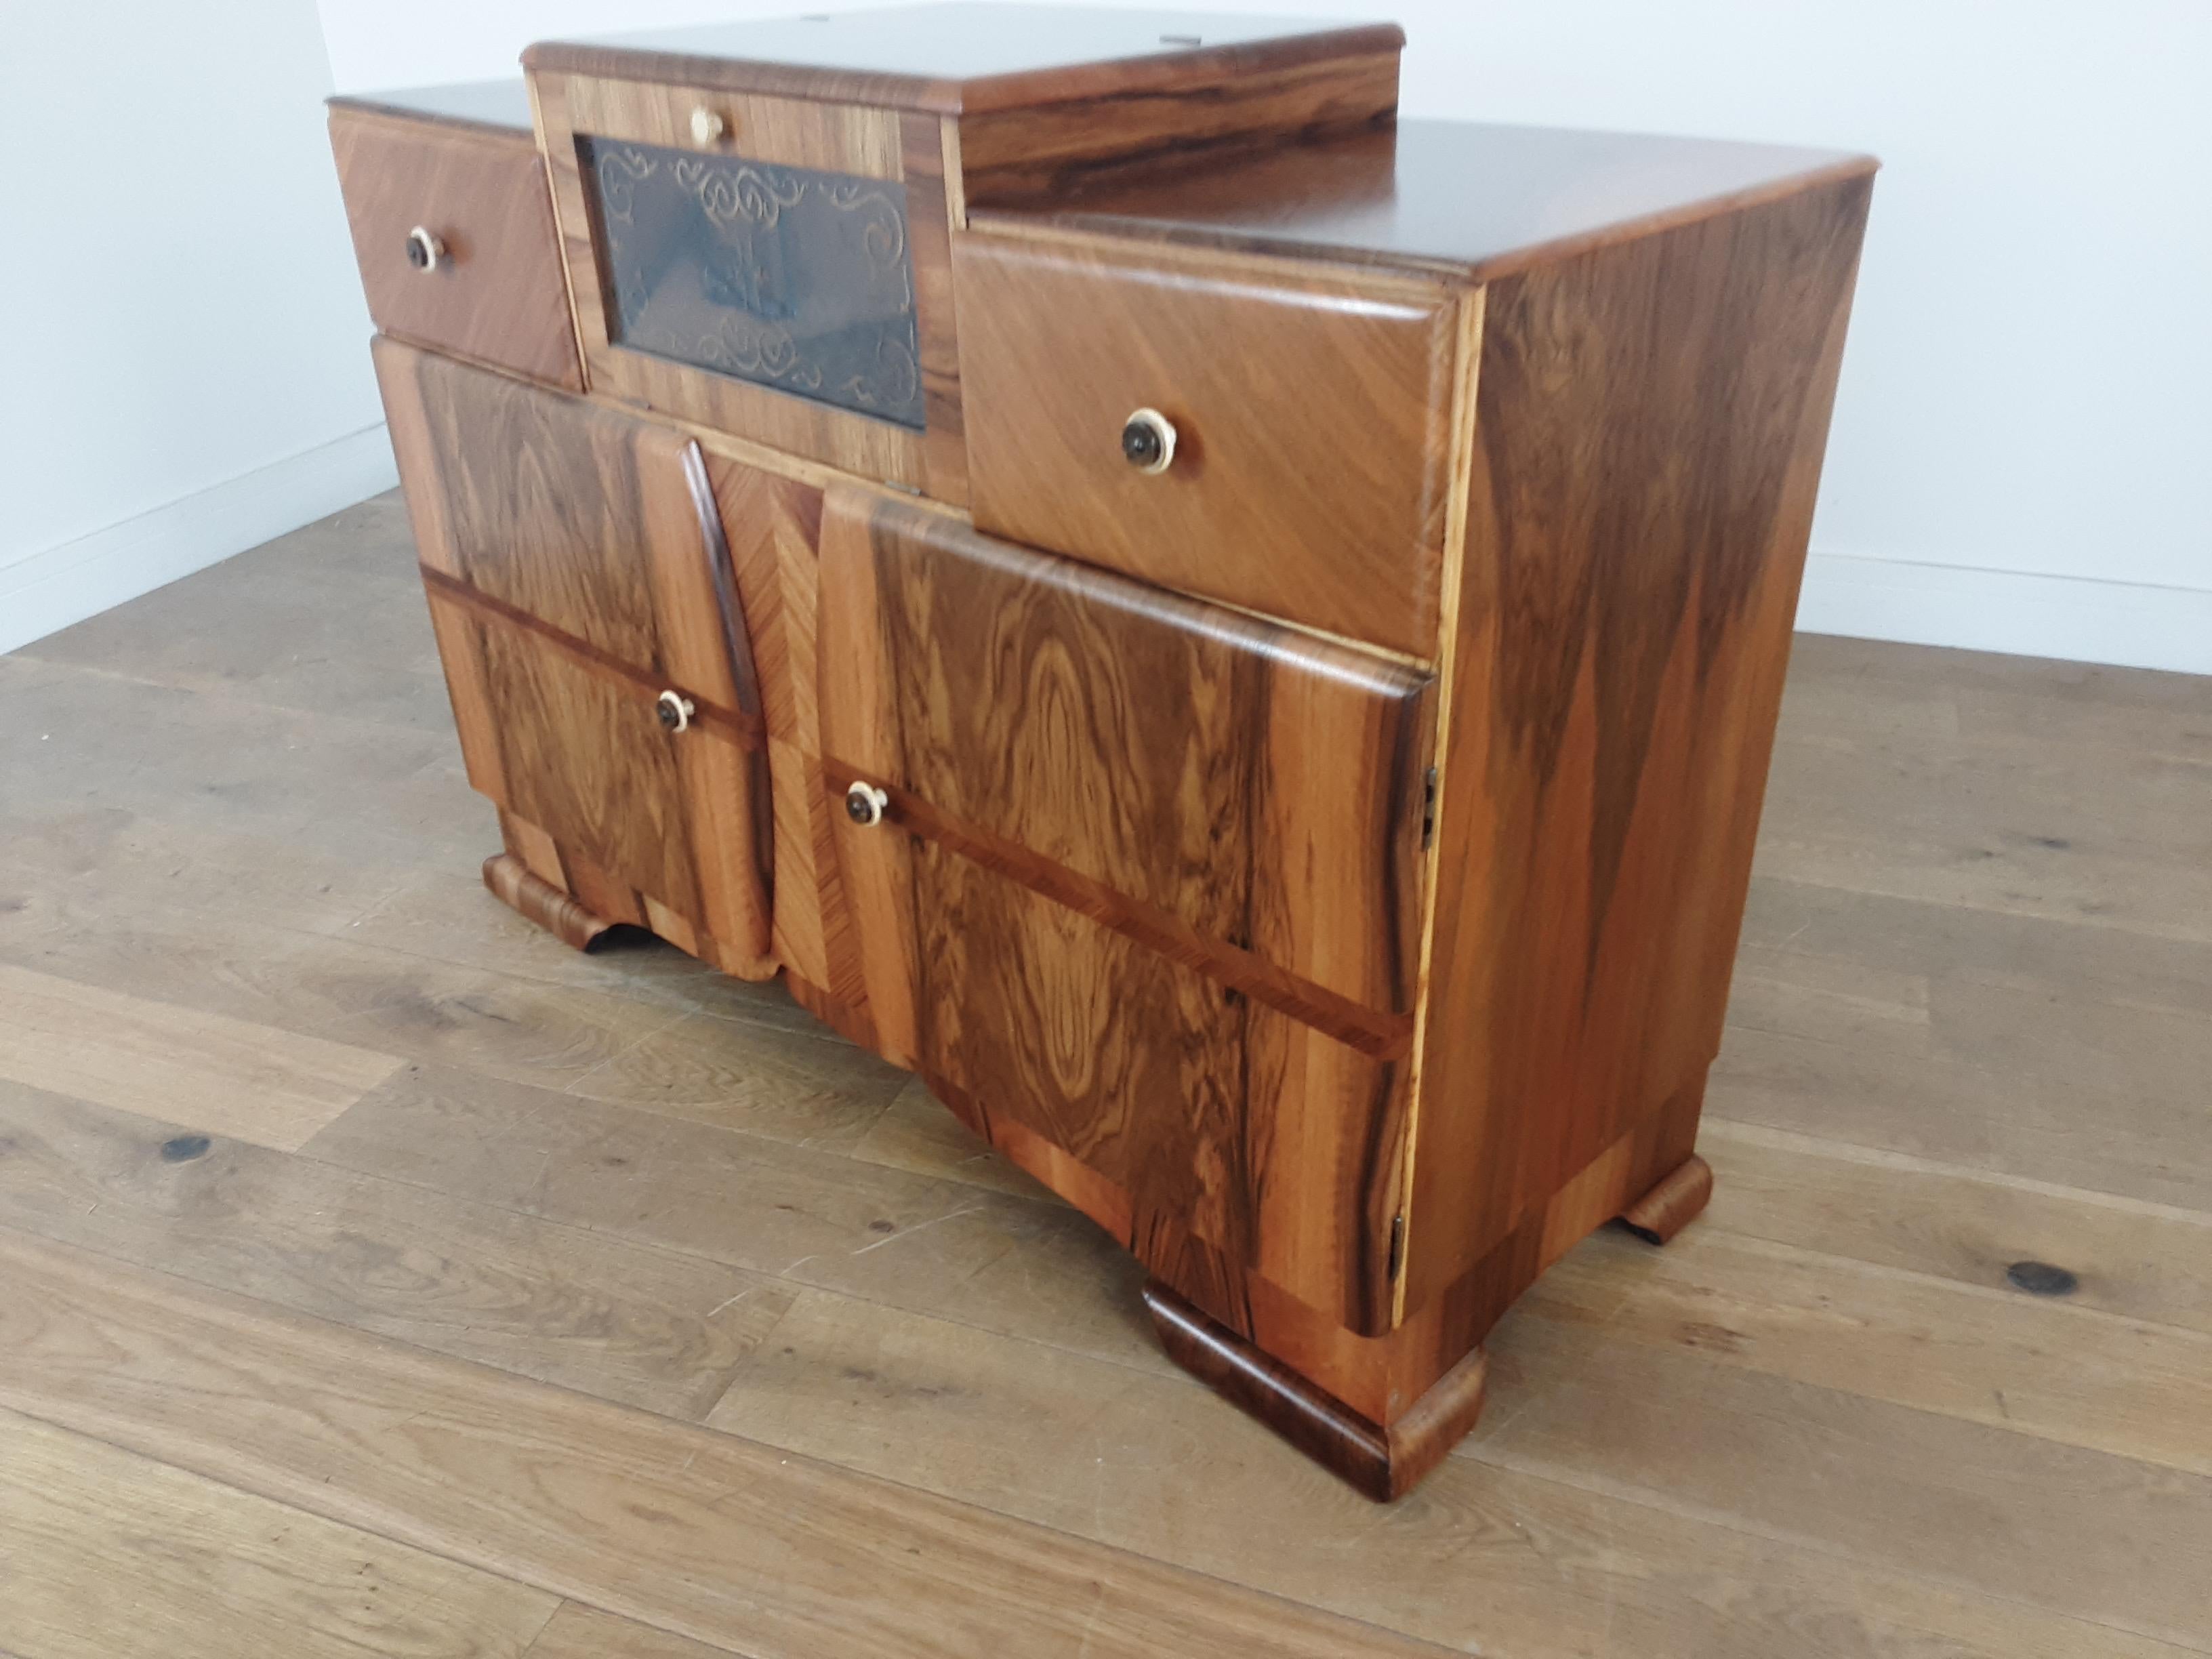 20th Century British Art Deco Cocktail Bar Sideboard in a Figured Brown Walnut, circa 1930 For Sale